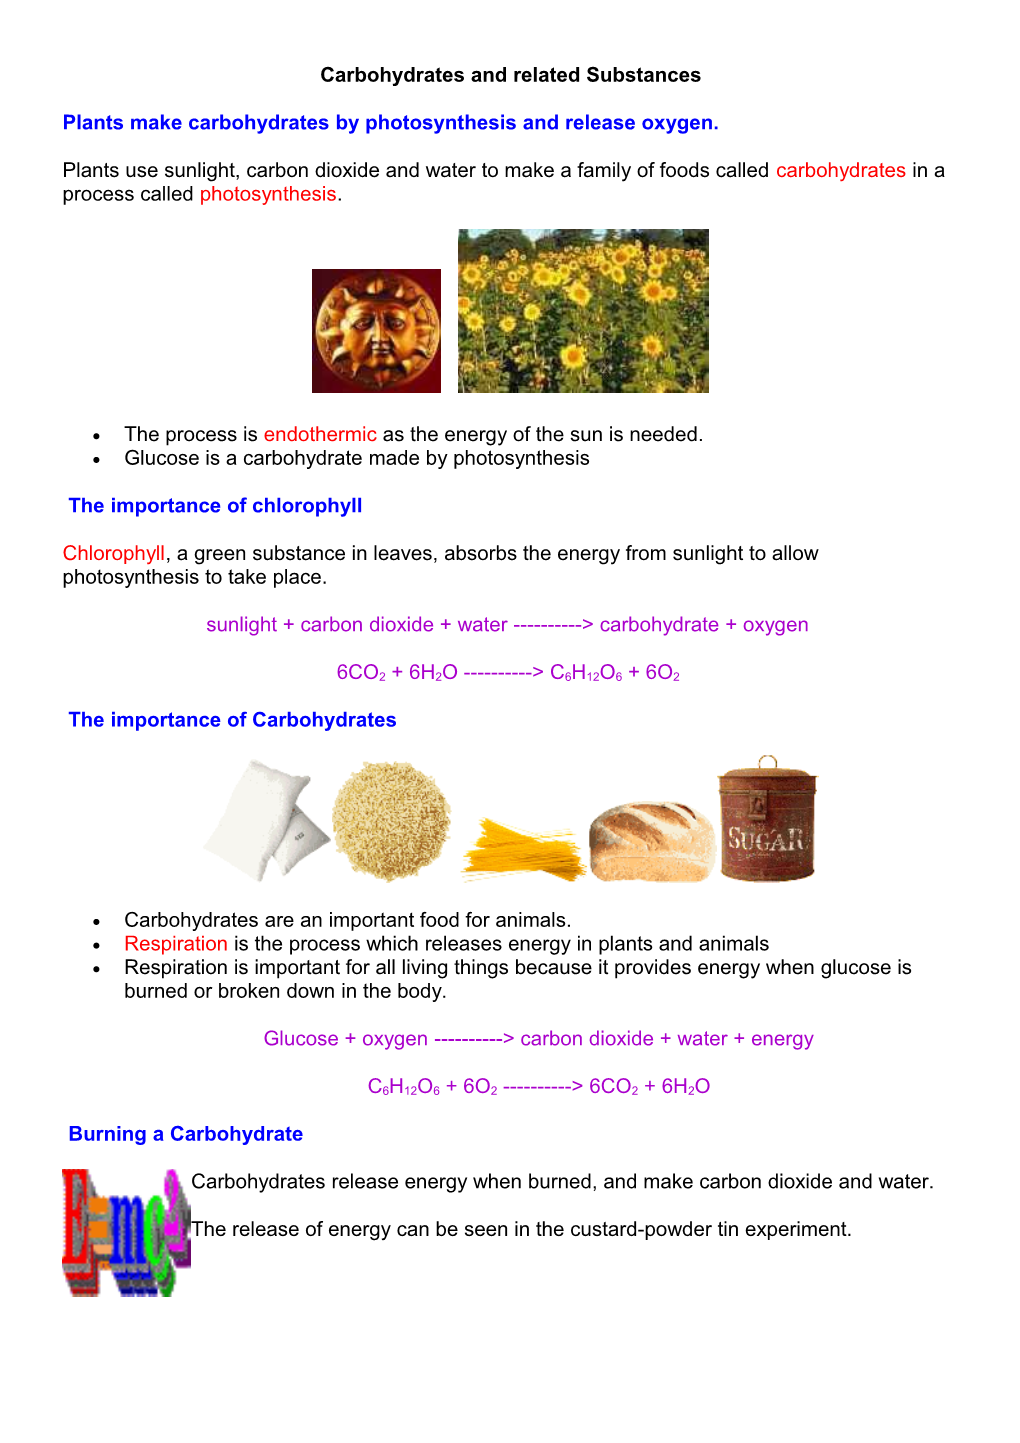 Topic 15 - Carbohydrates and Related Substances